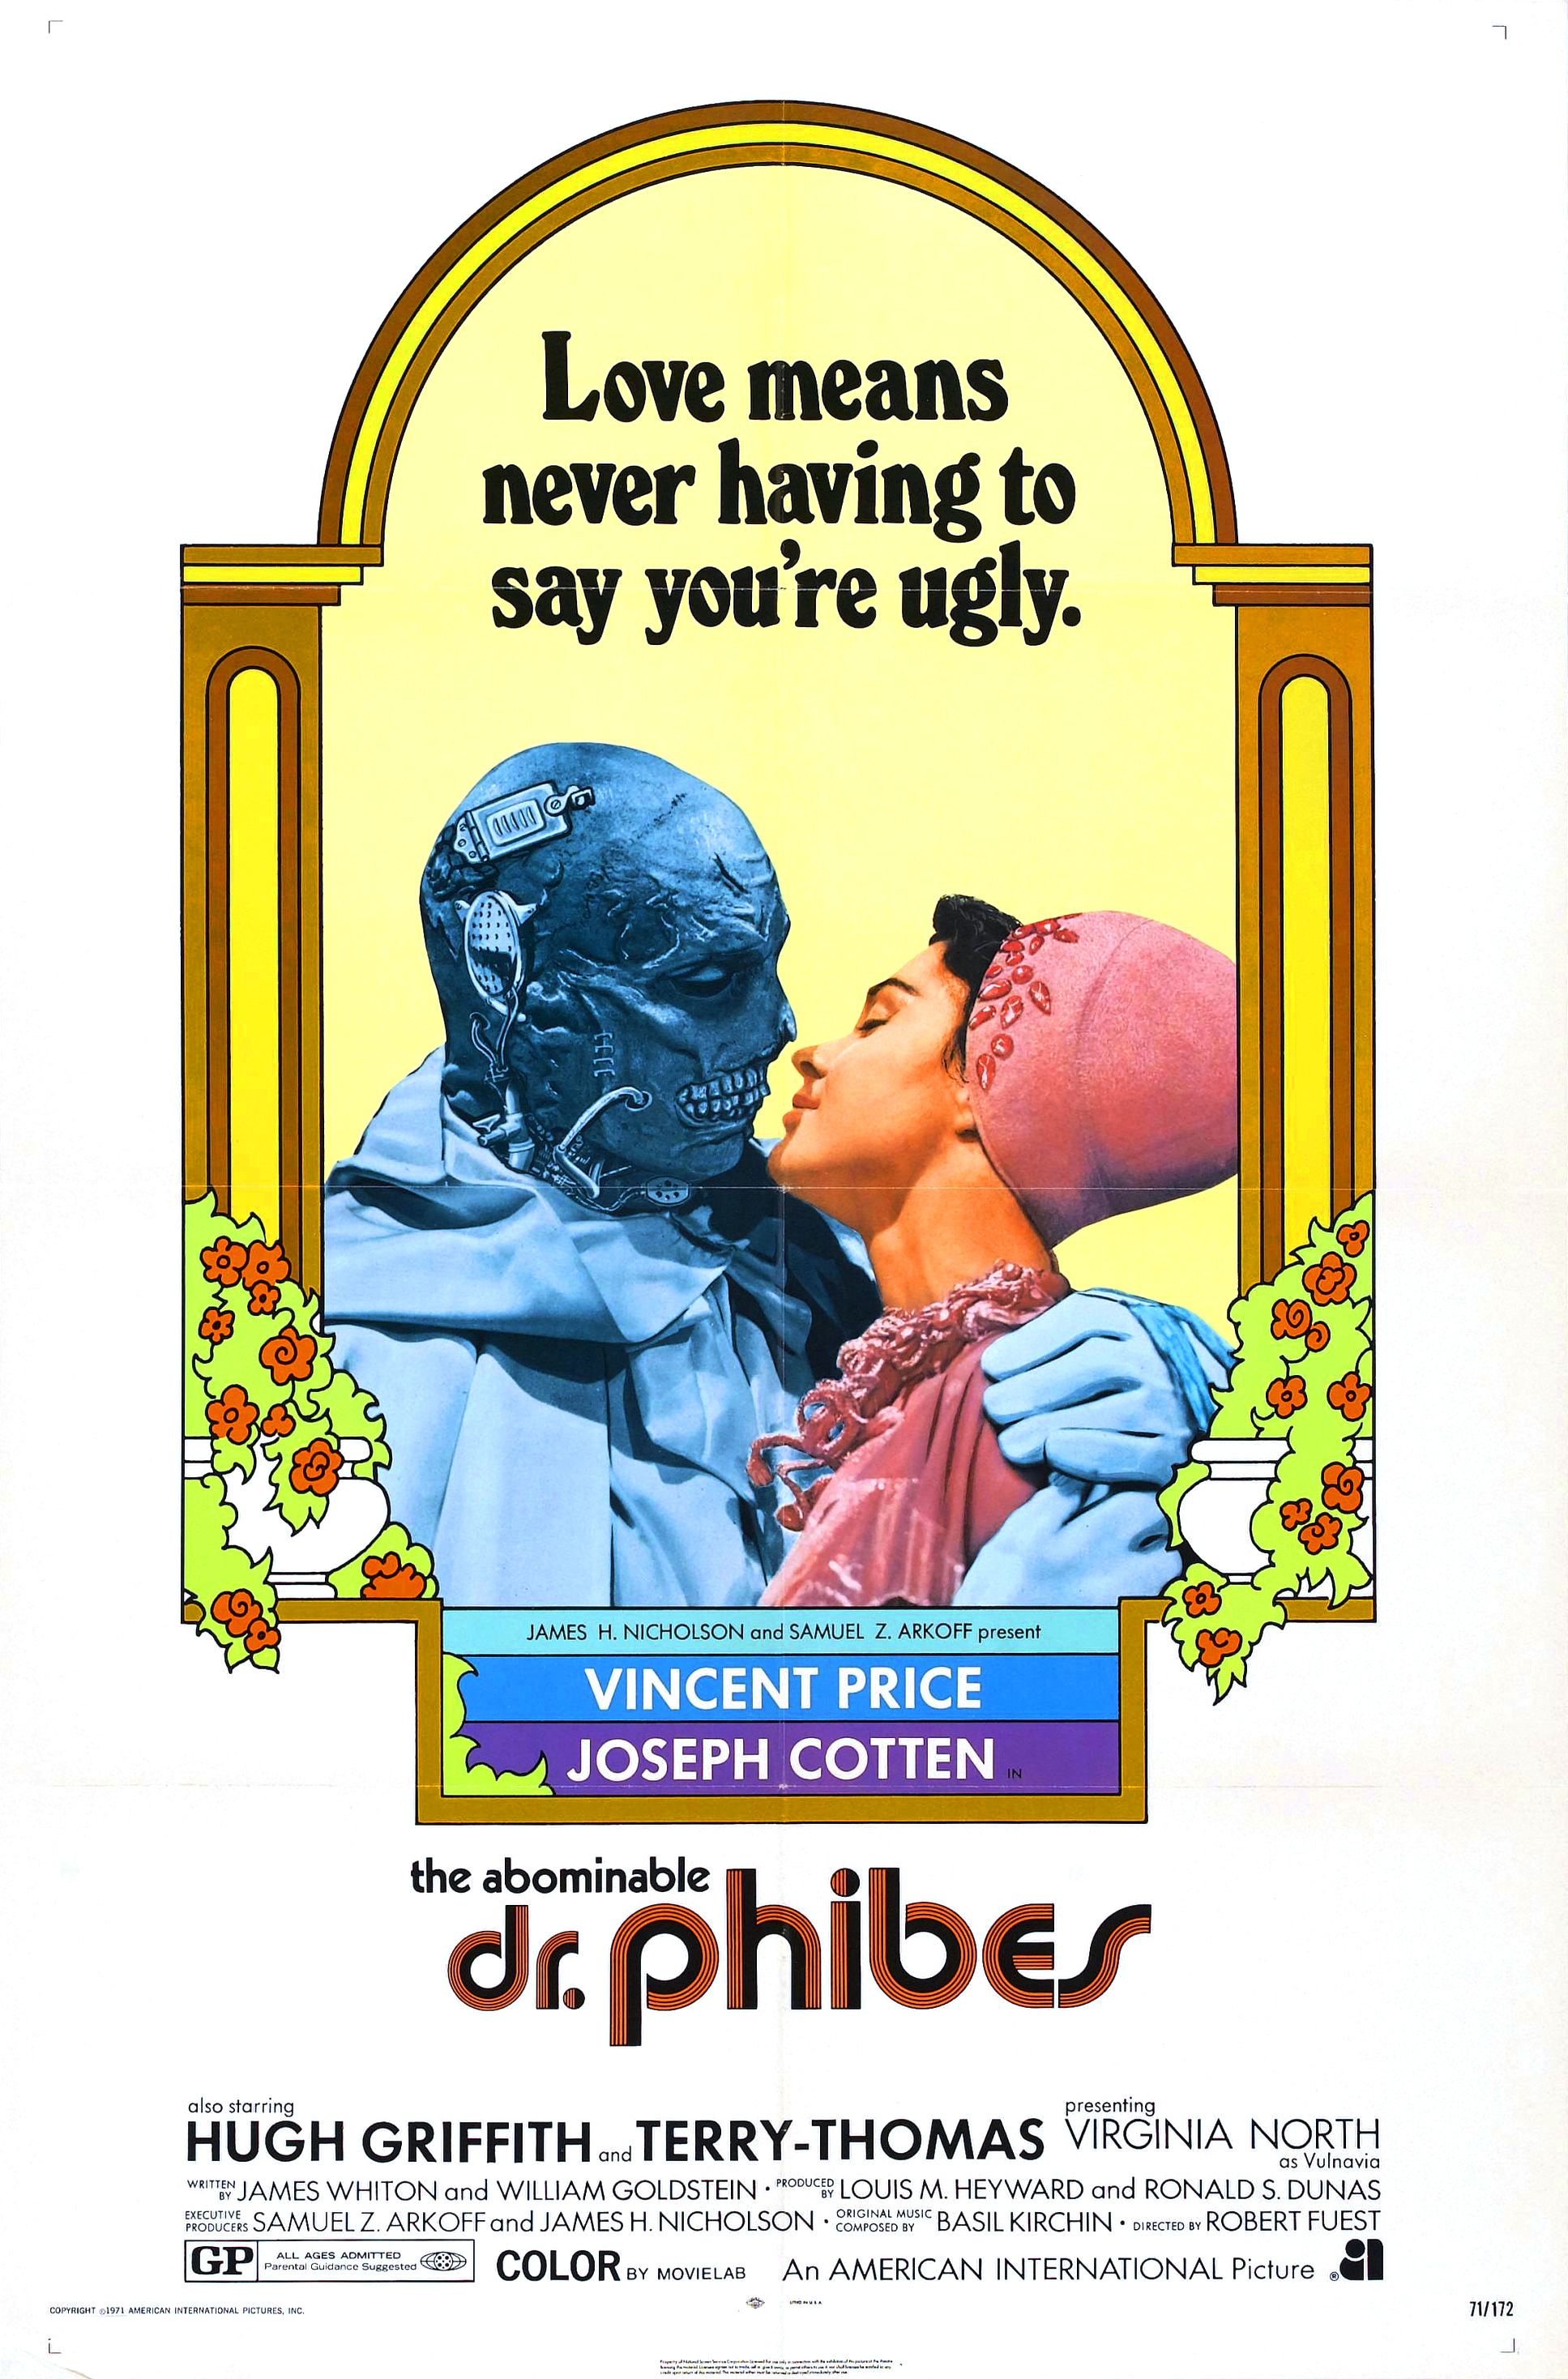 Poster for The Abominable Dr Phibes. Features a disfigured figure and a lady embraced in a kiss, with the caption "Love means never having to say you're ugly."